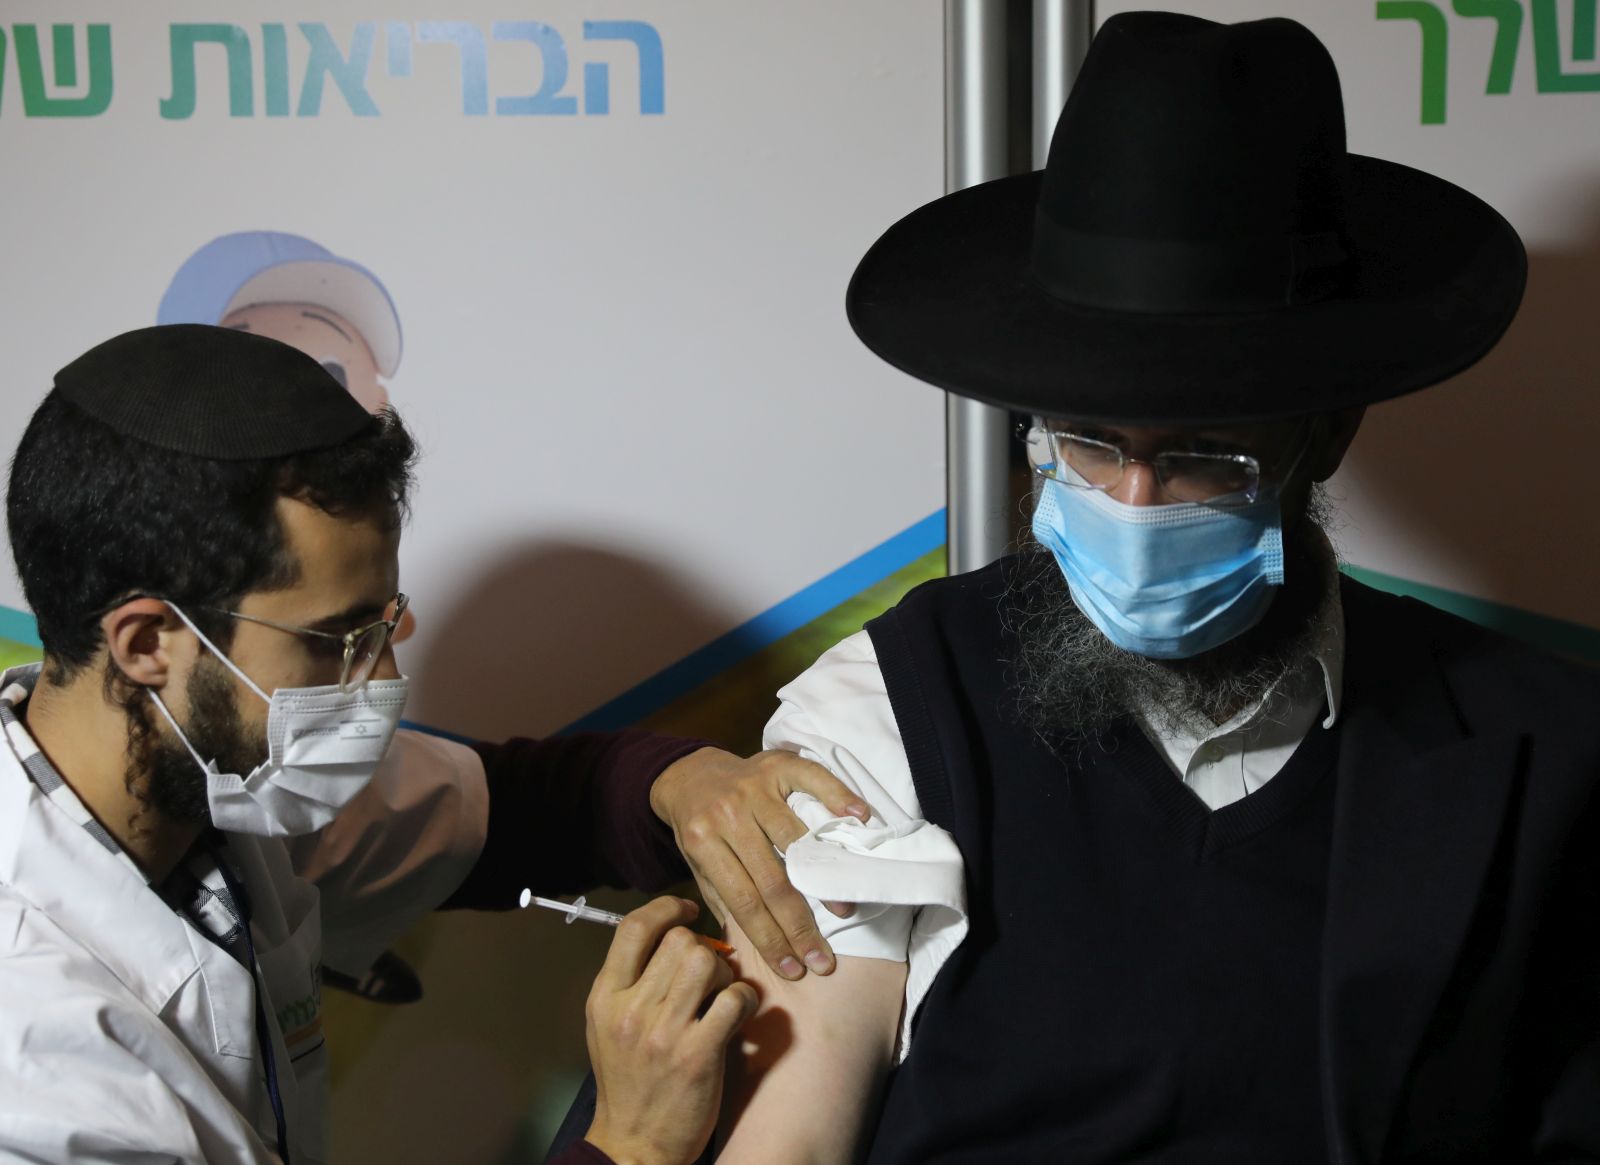 epa08937701 An ultra-orthodox Jewish man receives a coronavirus COVID-19 pandemic vaccine by a male nurse in Jerusalem, Israel, 14 January 2021. Media report that Israel is on a massive nationwide COVID-19 vaccination campaign, with more than two million people already got the first dose.  EPA/ABIR SULTAN